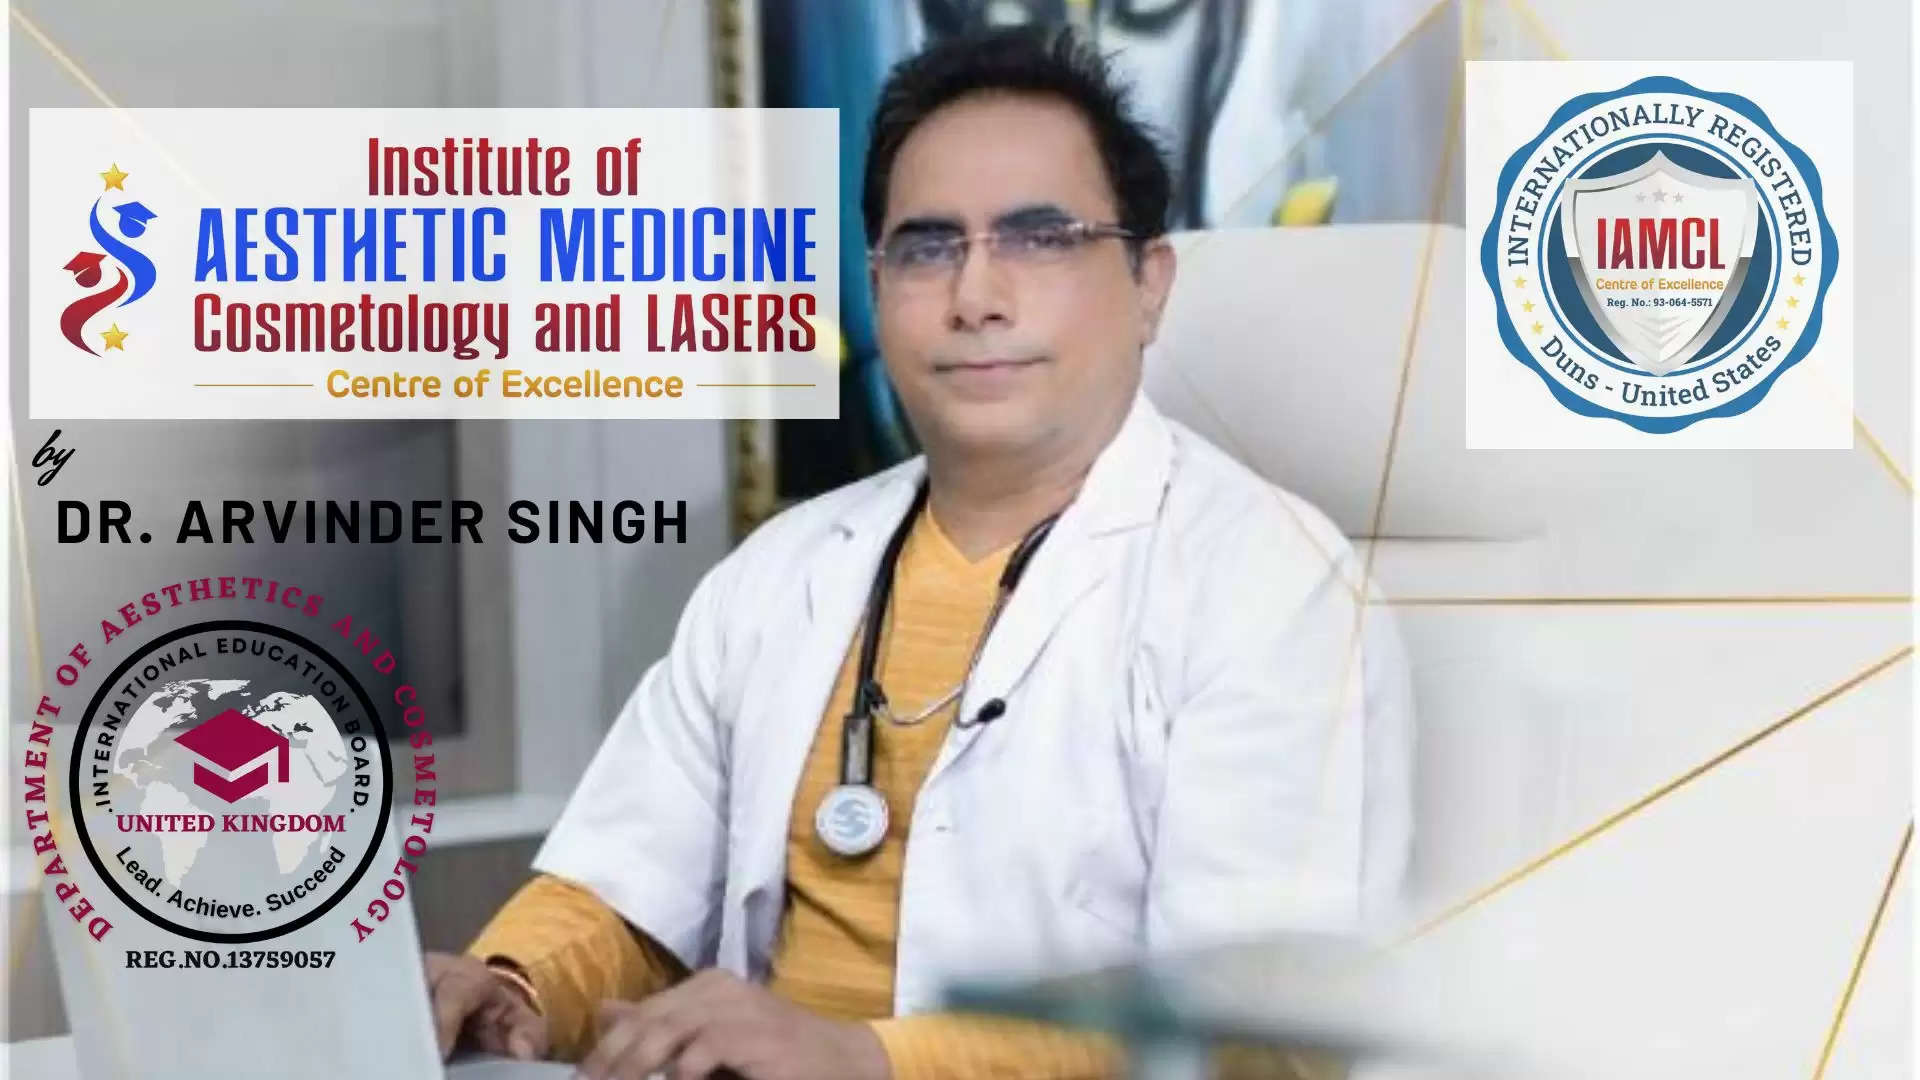 Dr Arvinder Singh, First Internationally Certified Training Institute in Clinical Cosmetology, Career in Clinical Cosmetology, Training in Clinical Cosmetology